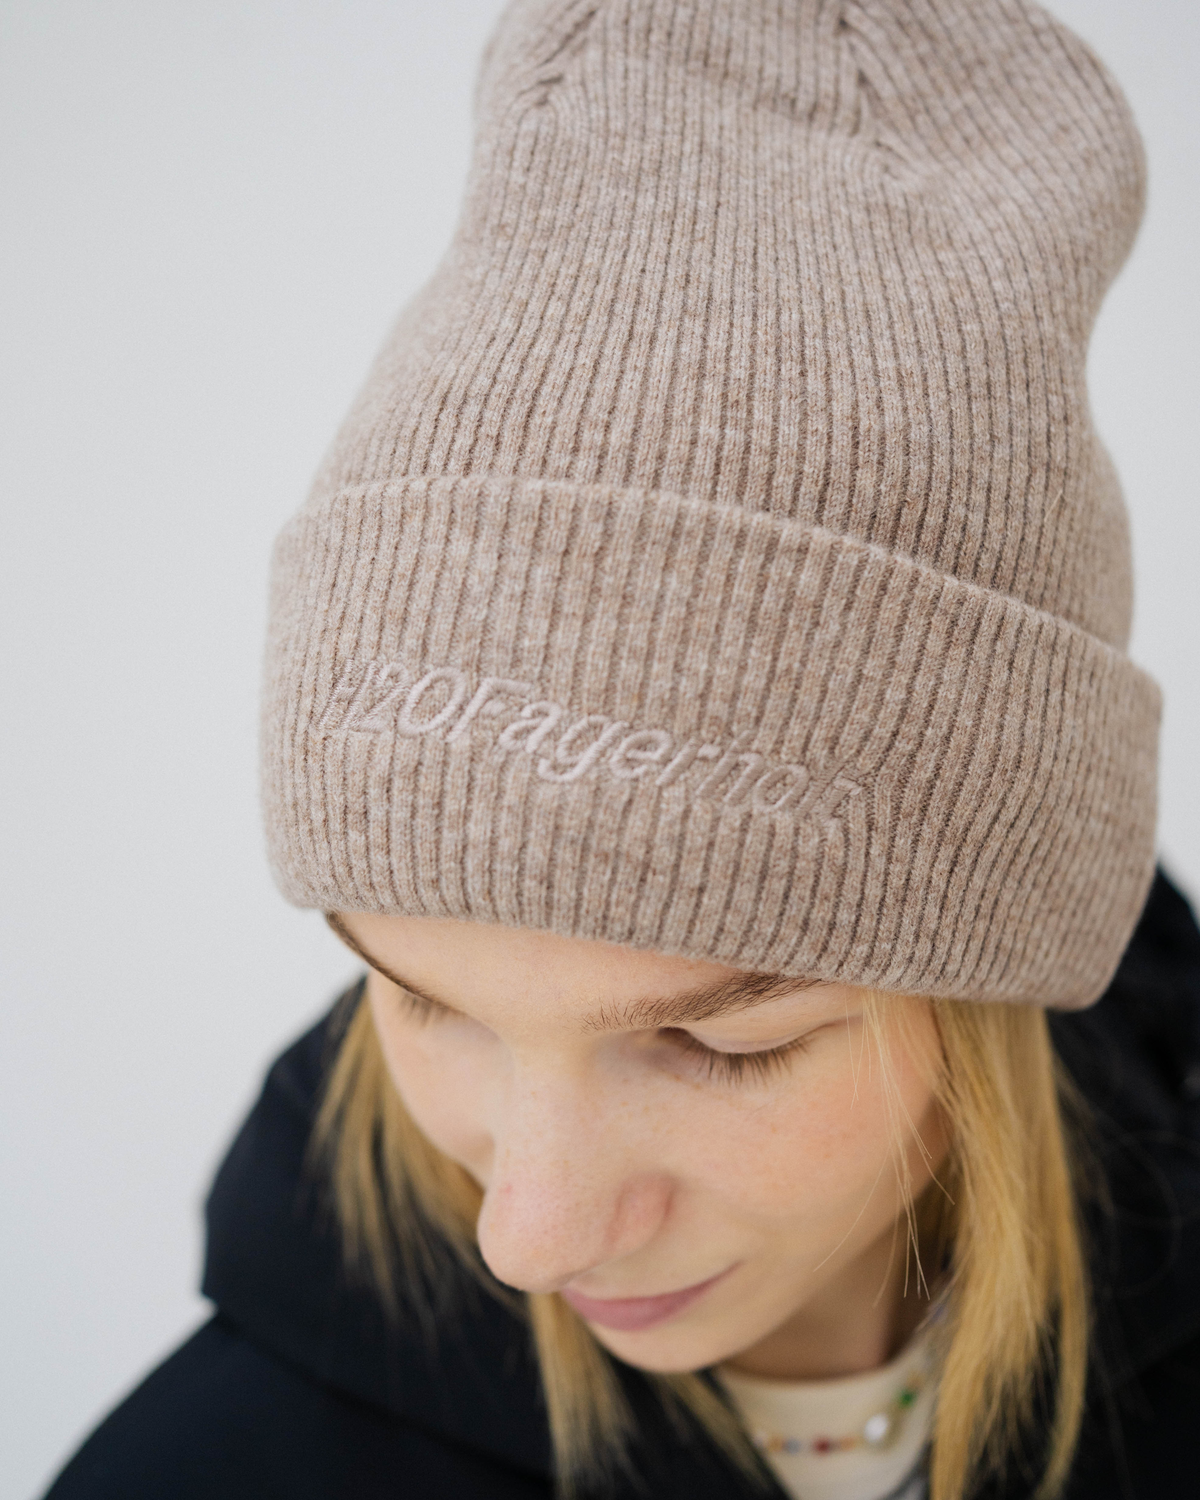 Cosy Hat - Baby Brown